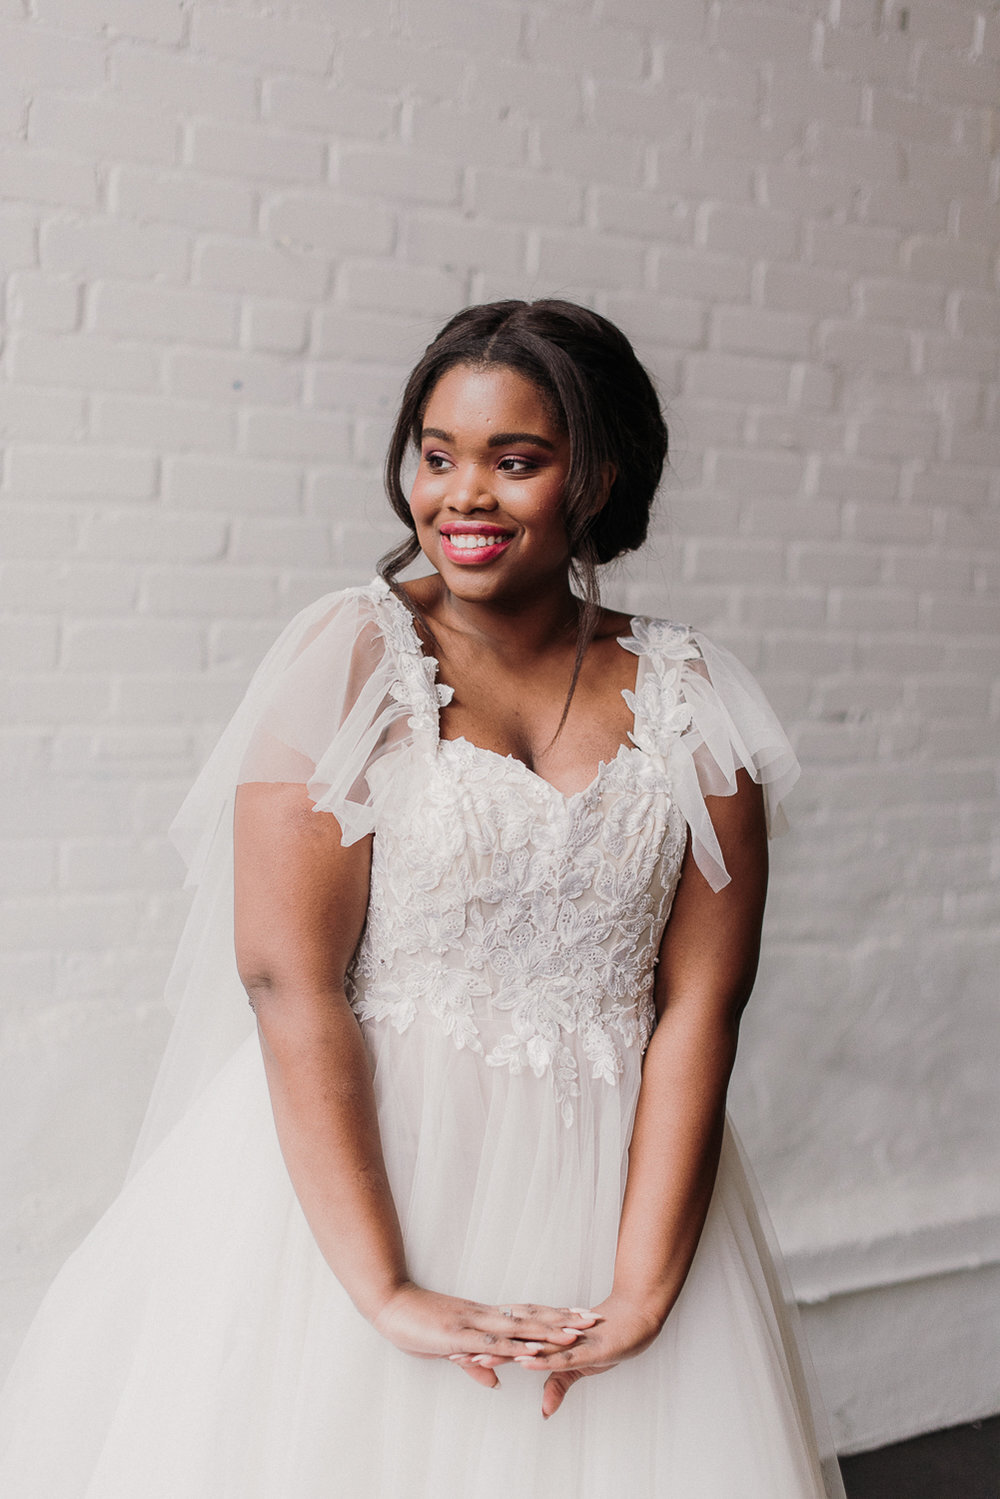 Size Inclusive Bridal Companies to Keep On Your Radar